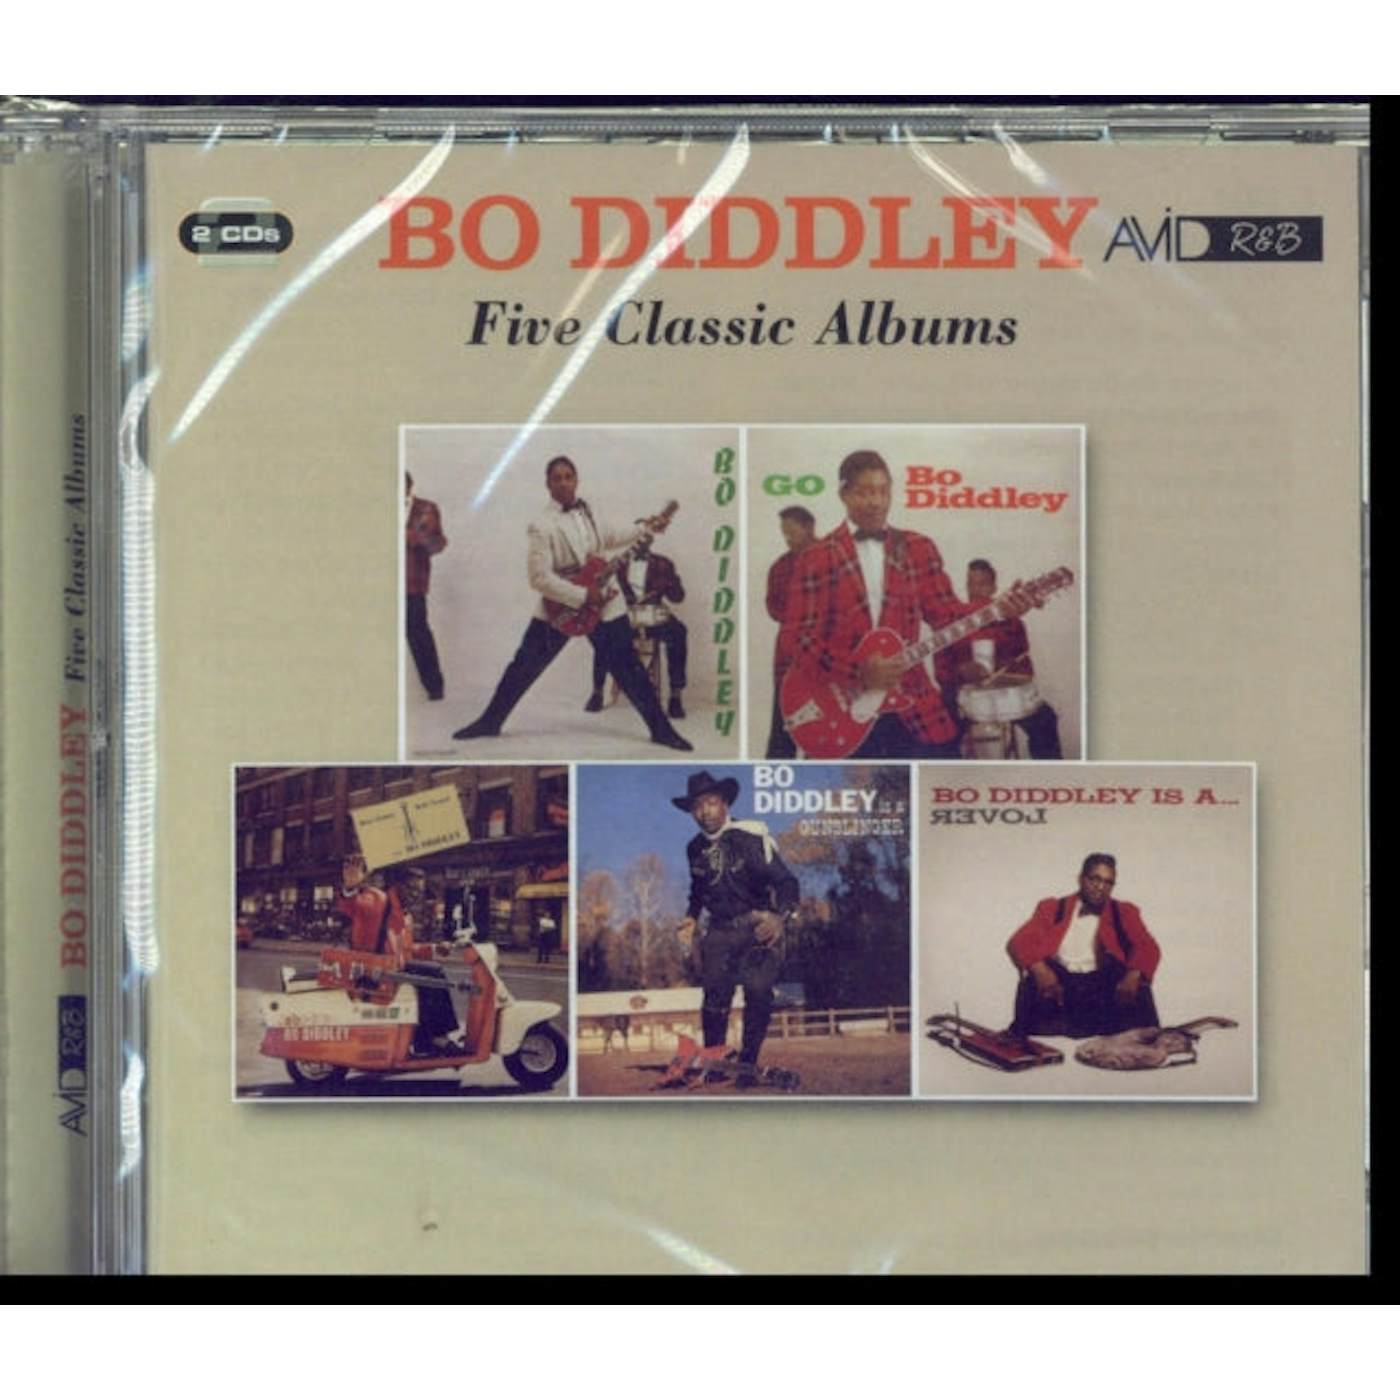 Bo Diddley CD - Five Classic Albums (Bo Diddley / Go Bo Diddley / Have Guitar Will Travel / Bo Diddley Is A Gunslinger / Bo Diddley Is A Lover)